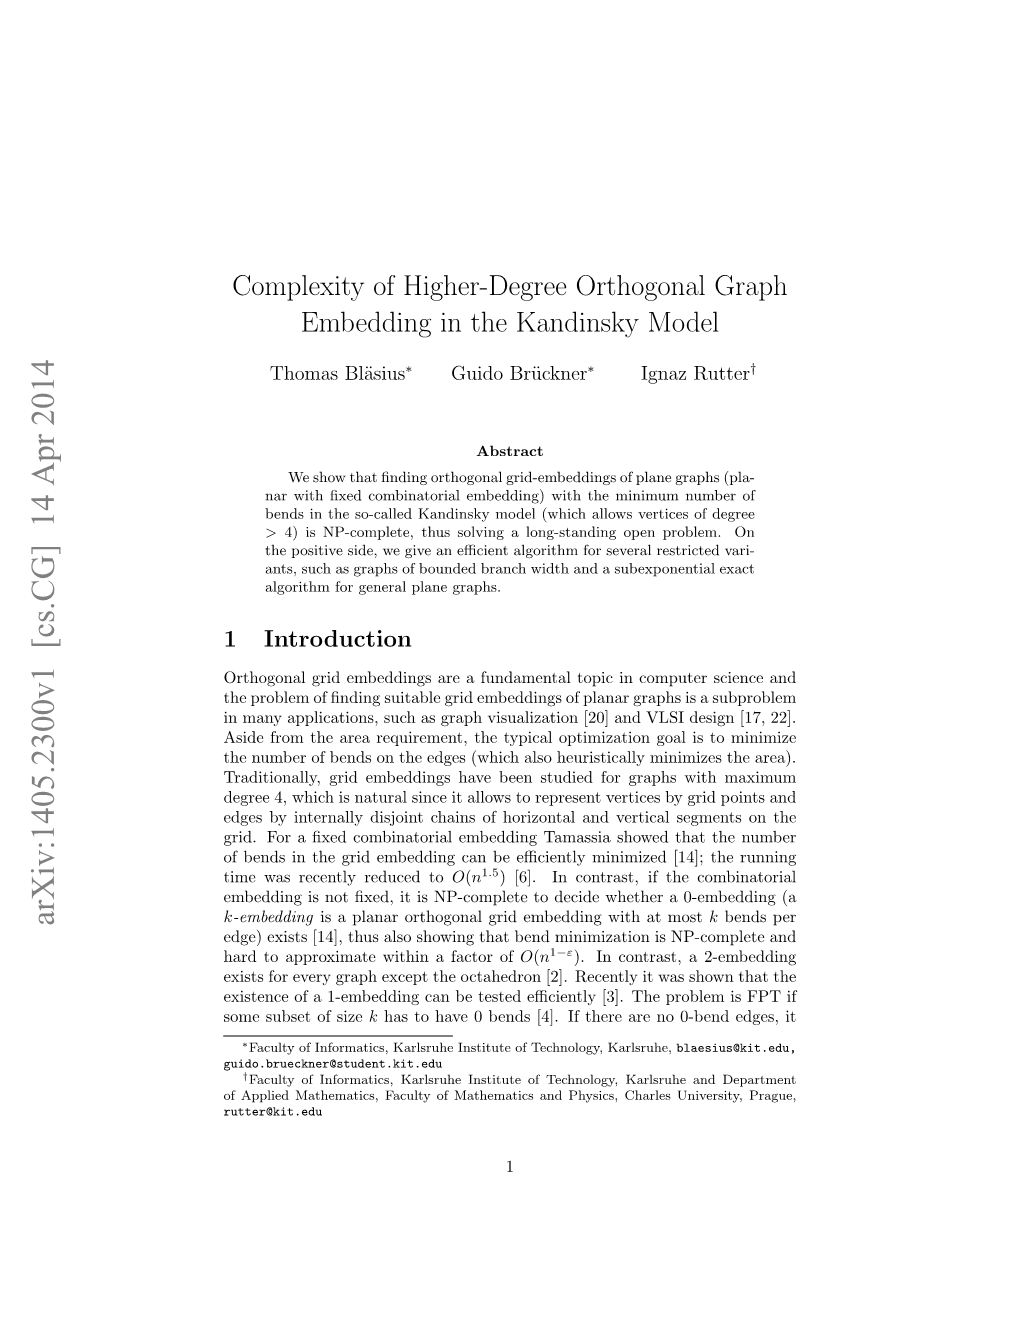 Complexity of Higher-Degree Orthogonal Graph Embedding in the Kandinsky Model